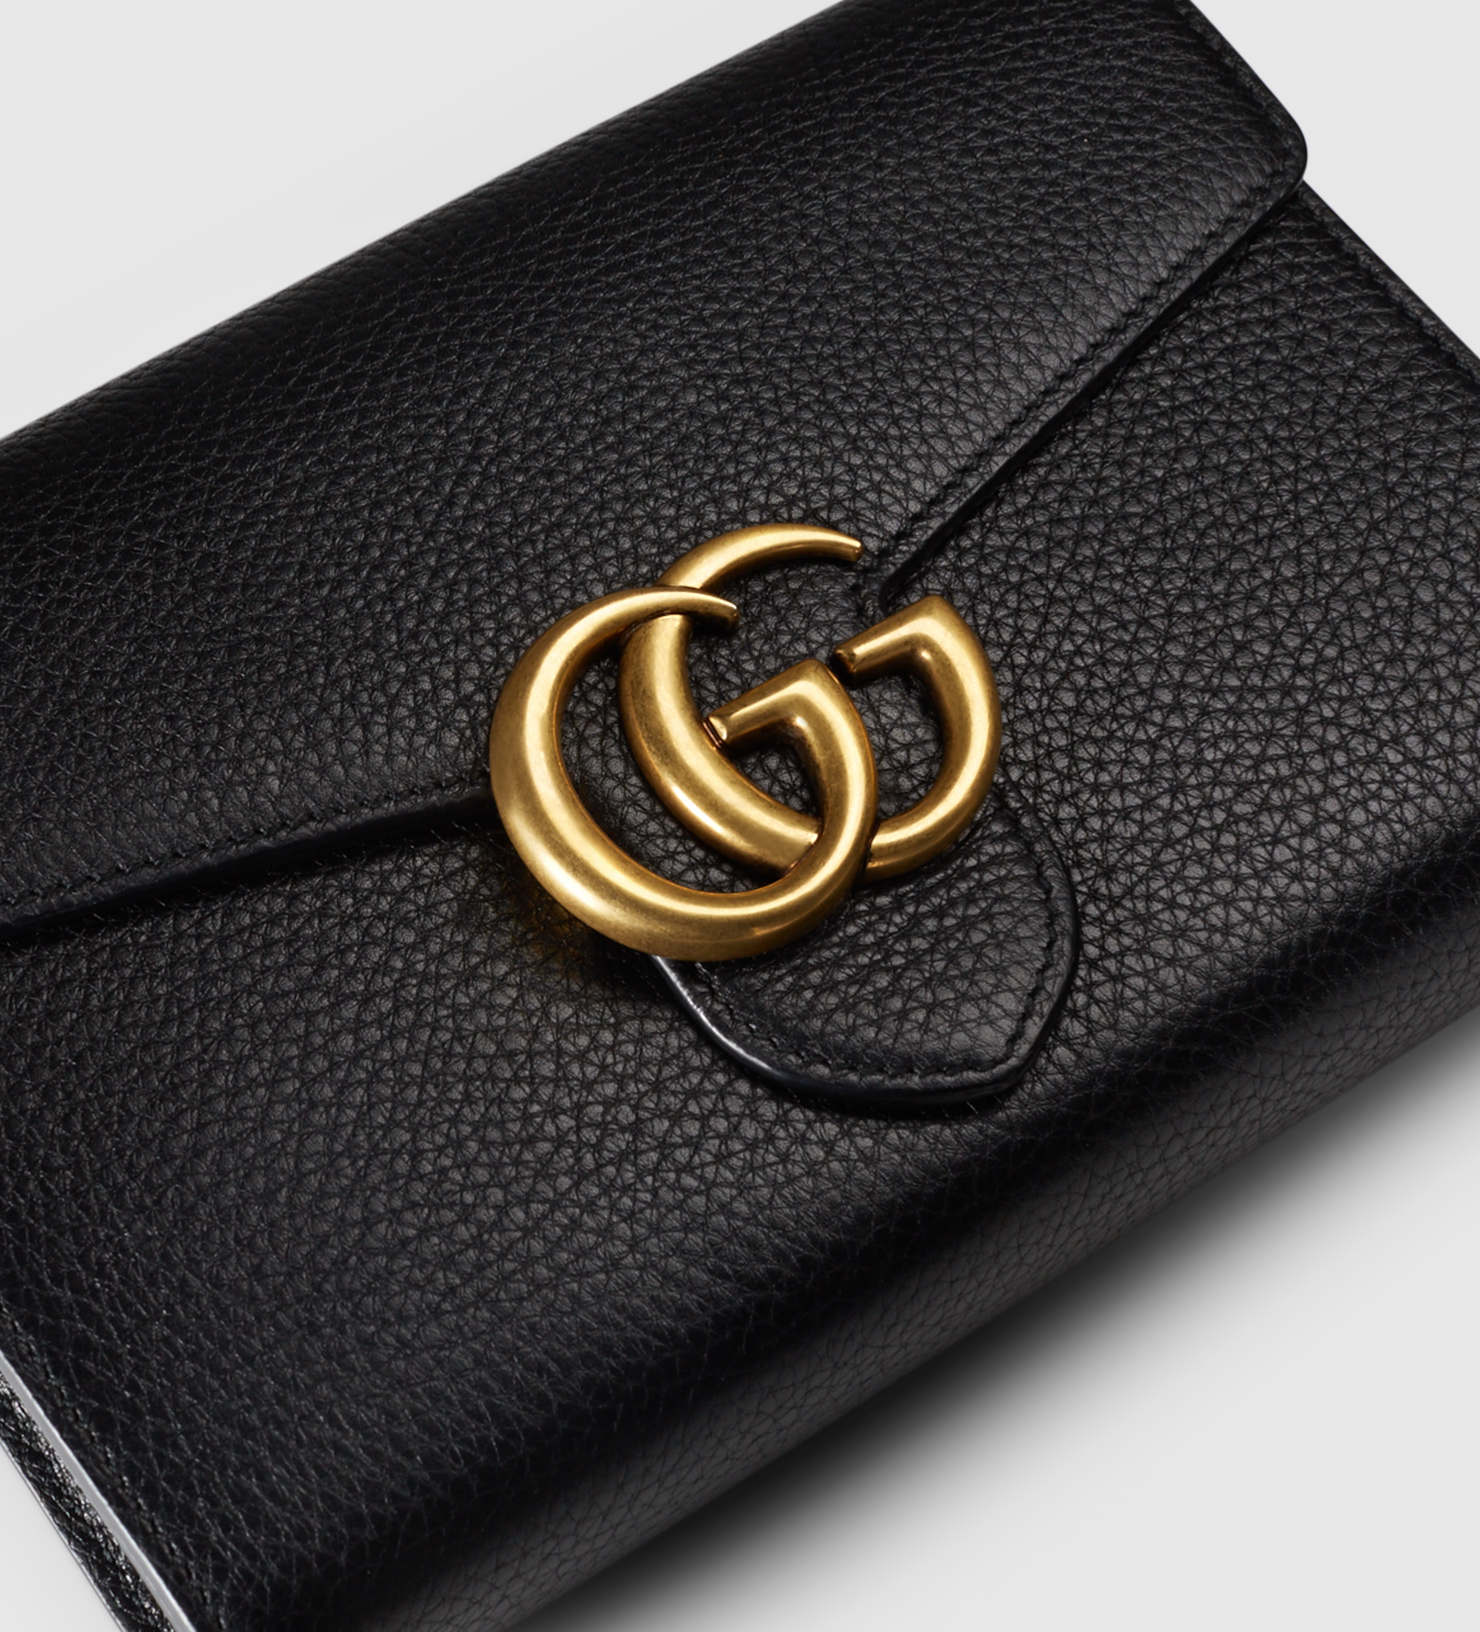 Gucci Gg Marmont Chain Wallets | The Art of Mike Mignola